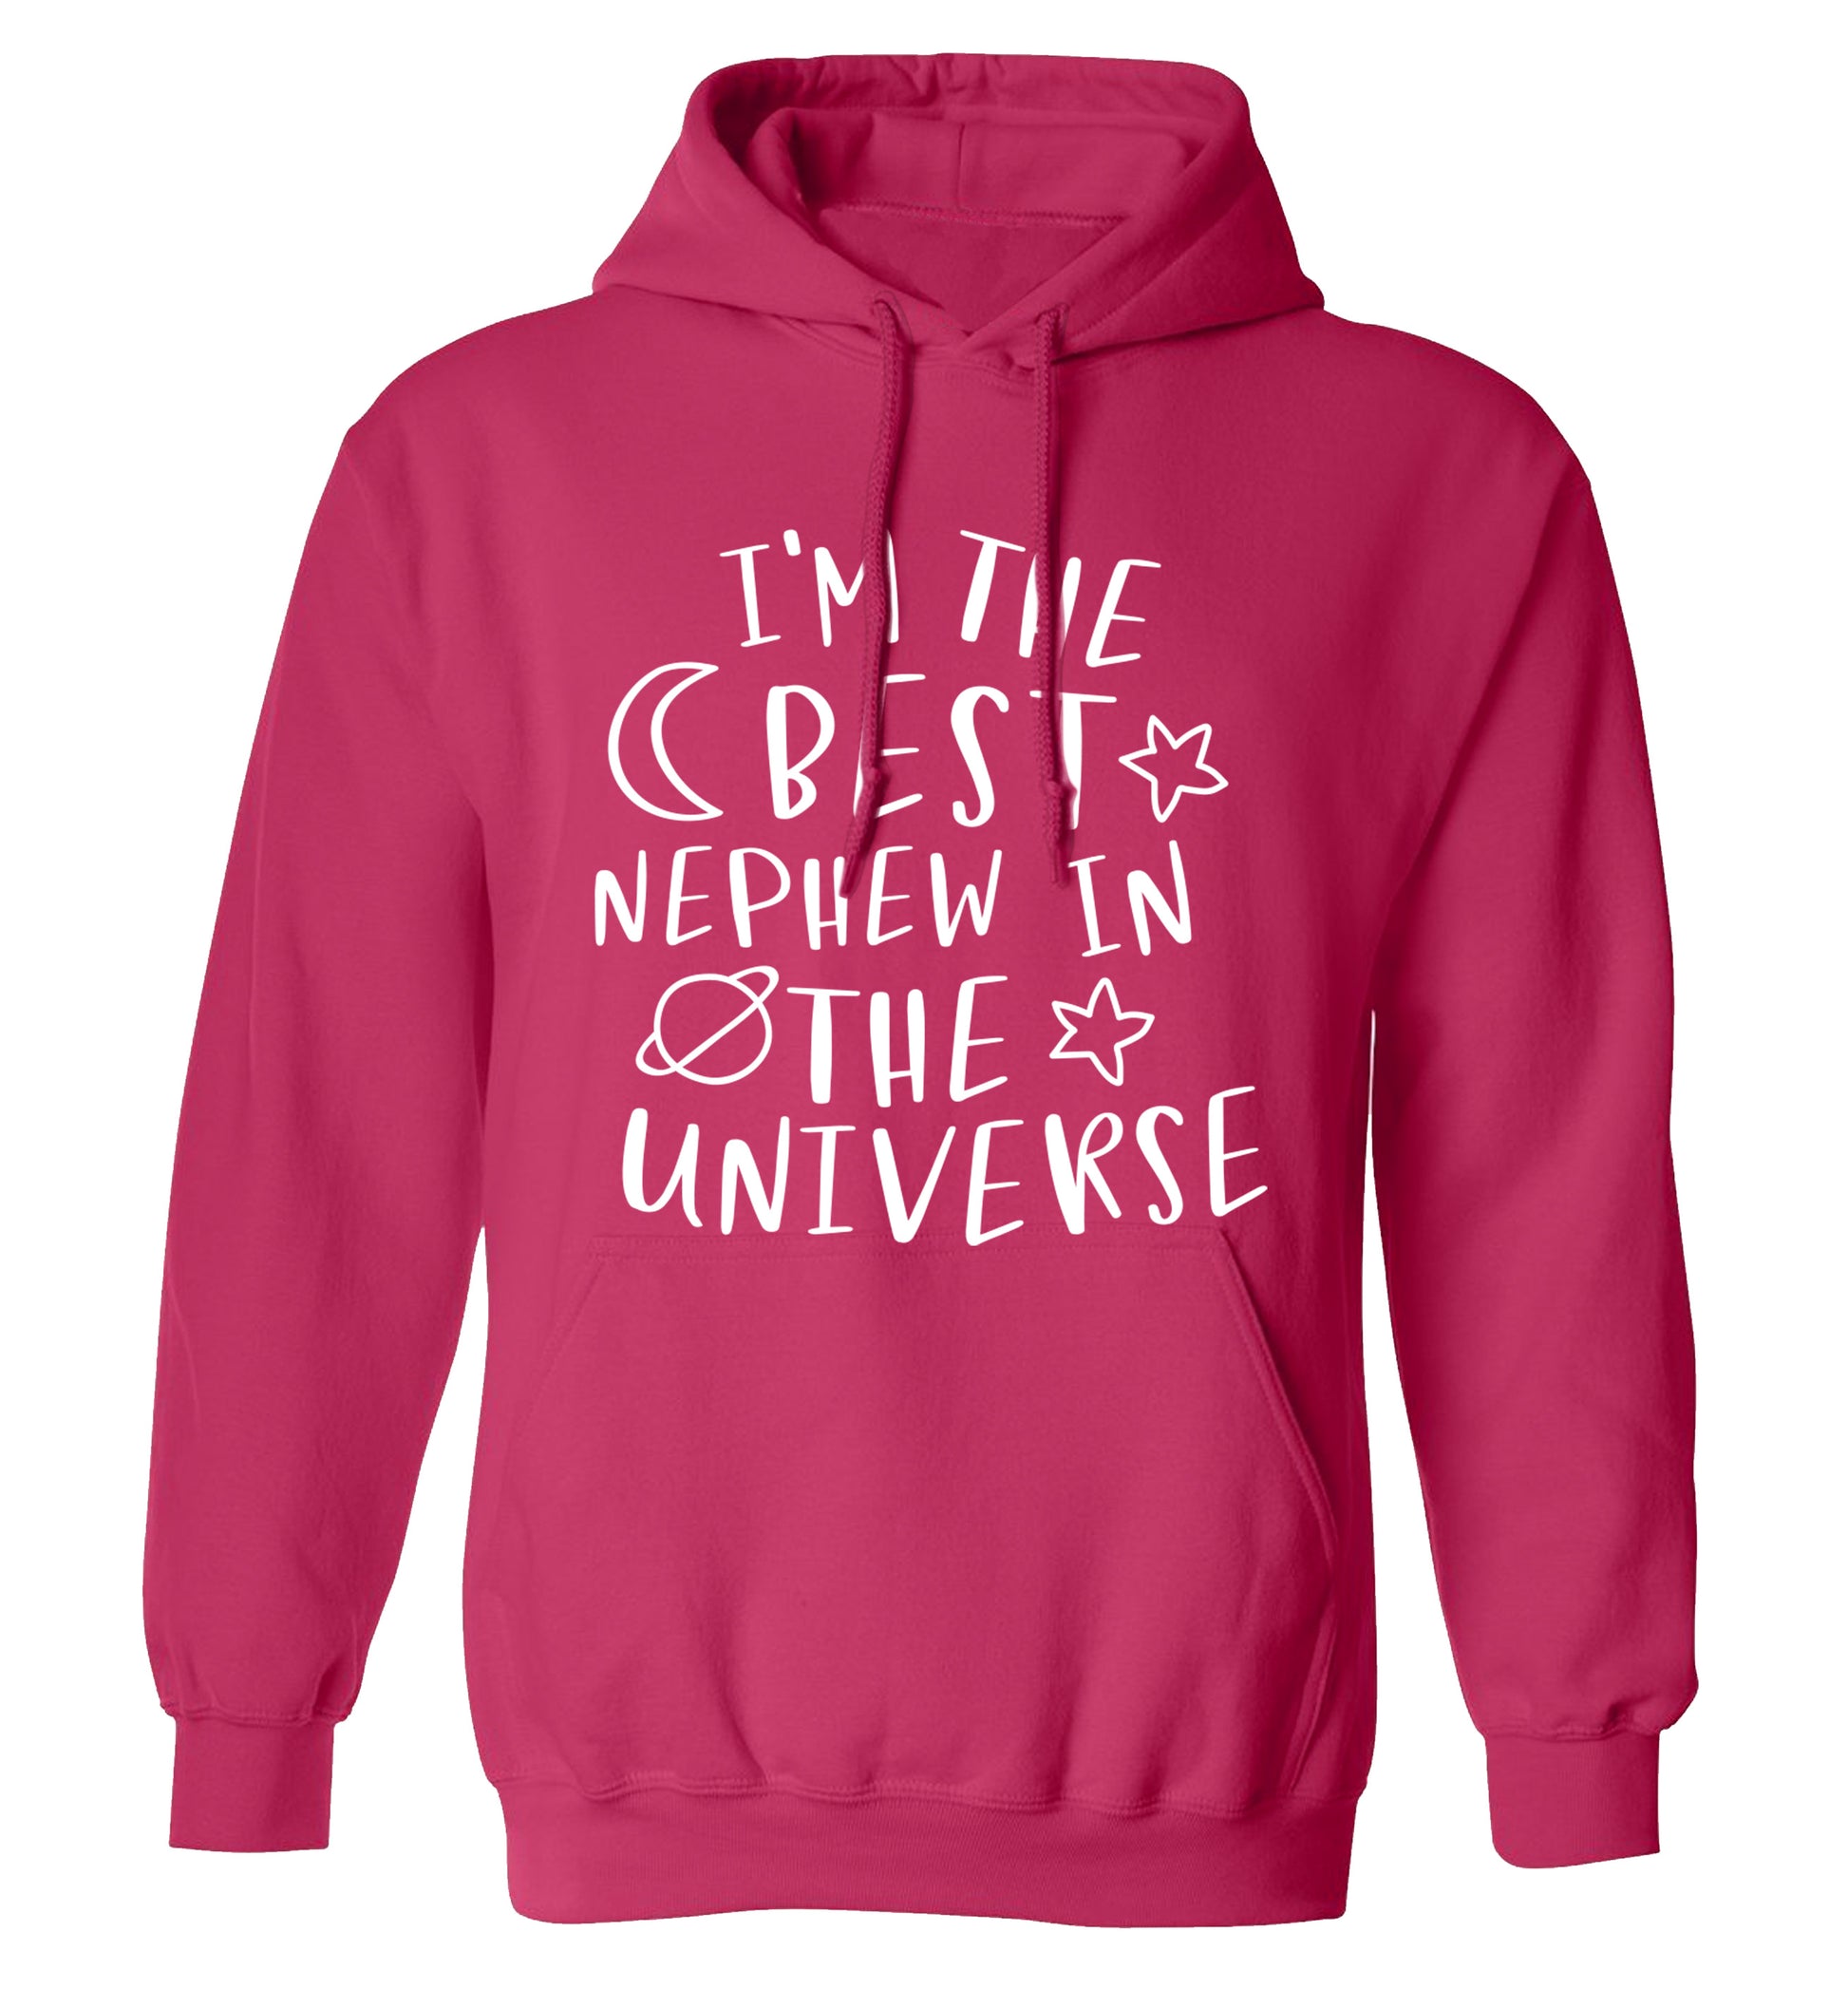 I'm the best nephew in the universe adults unisex pink hoodie 2XL